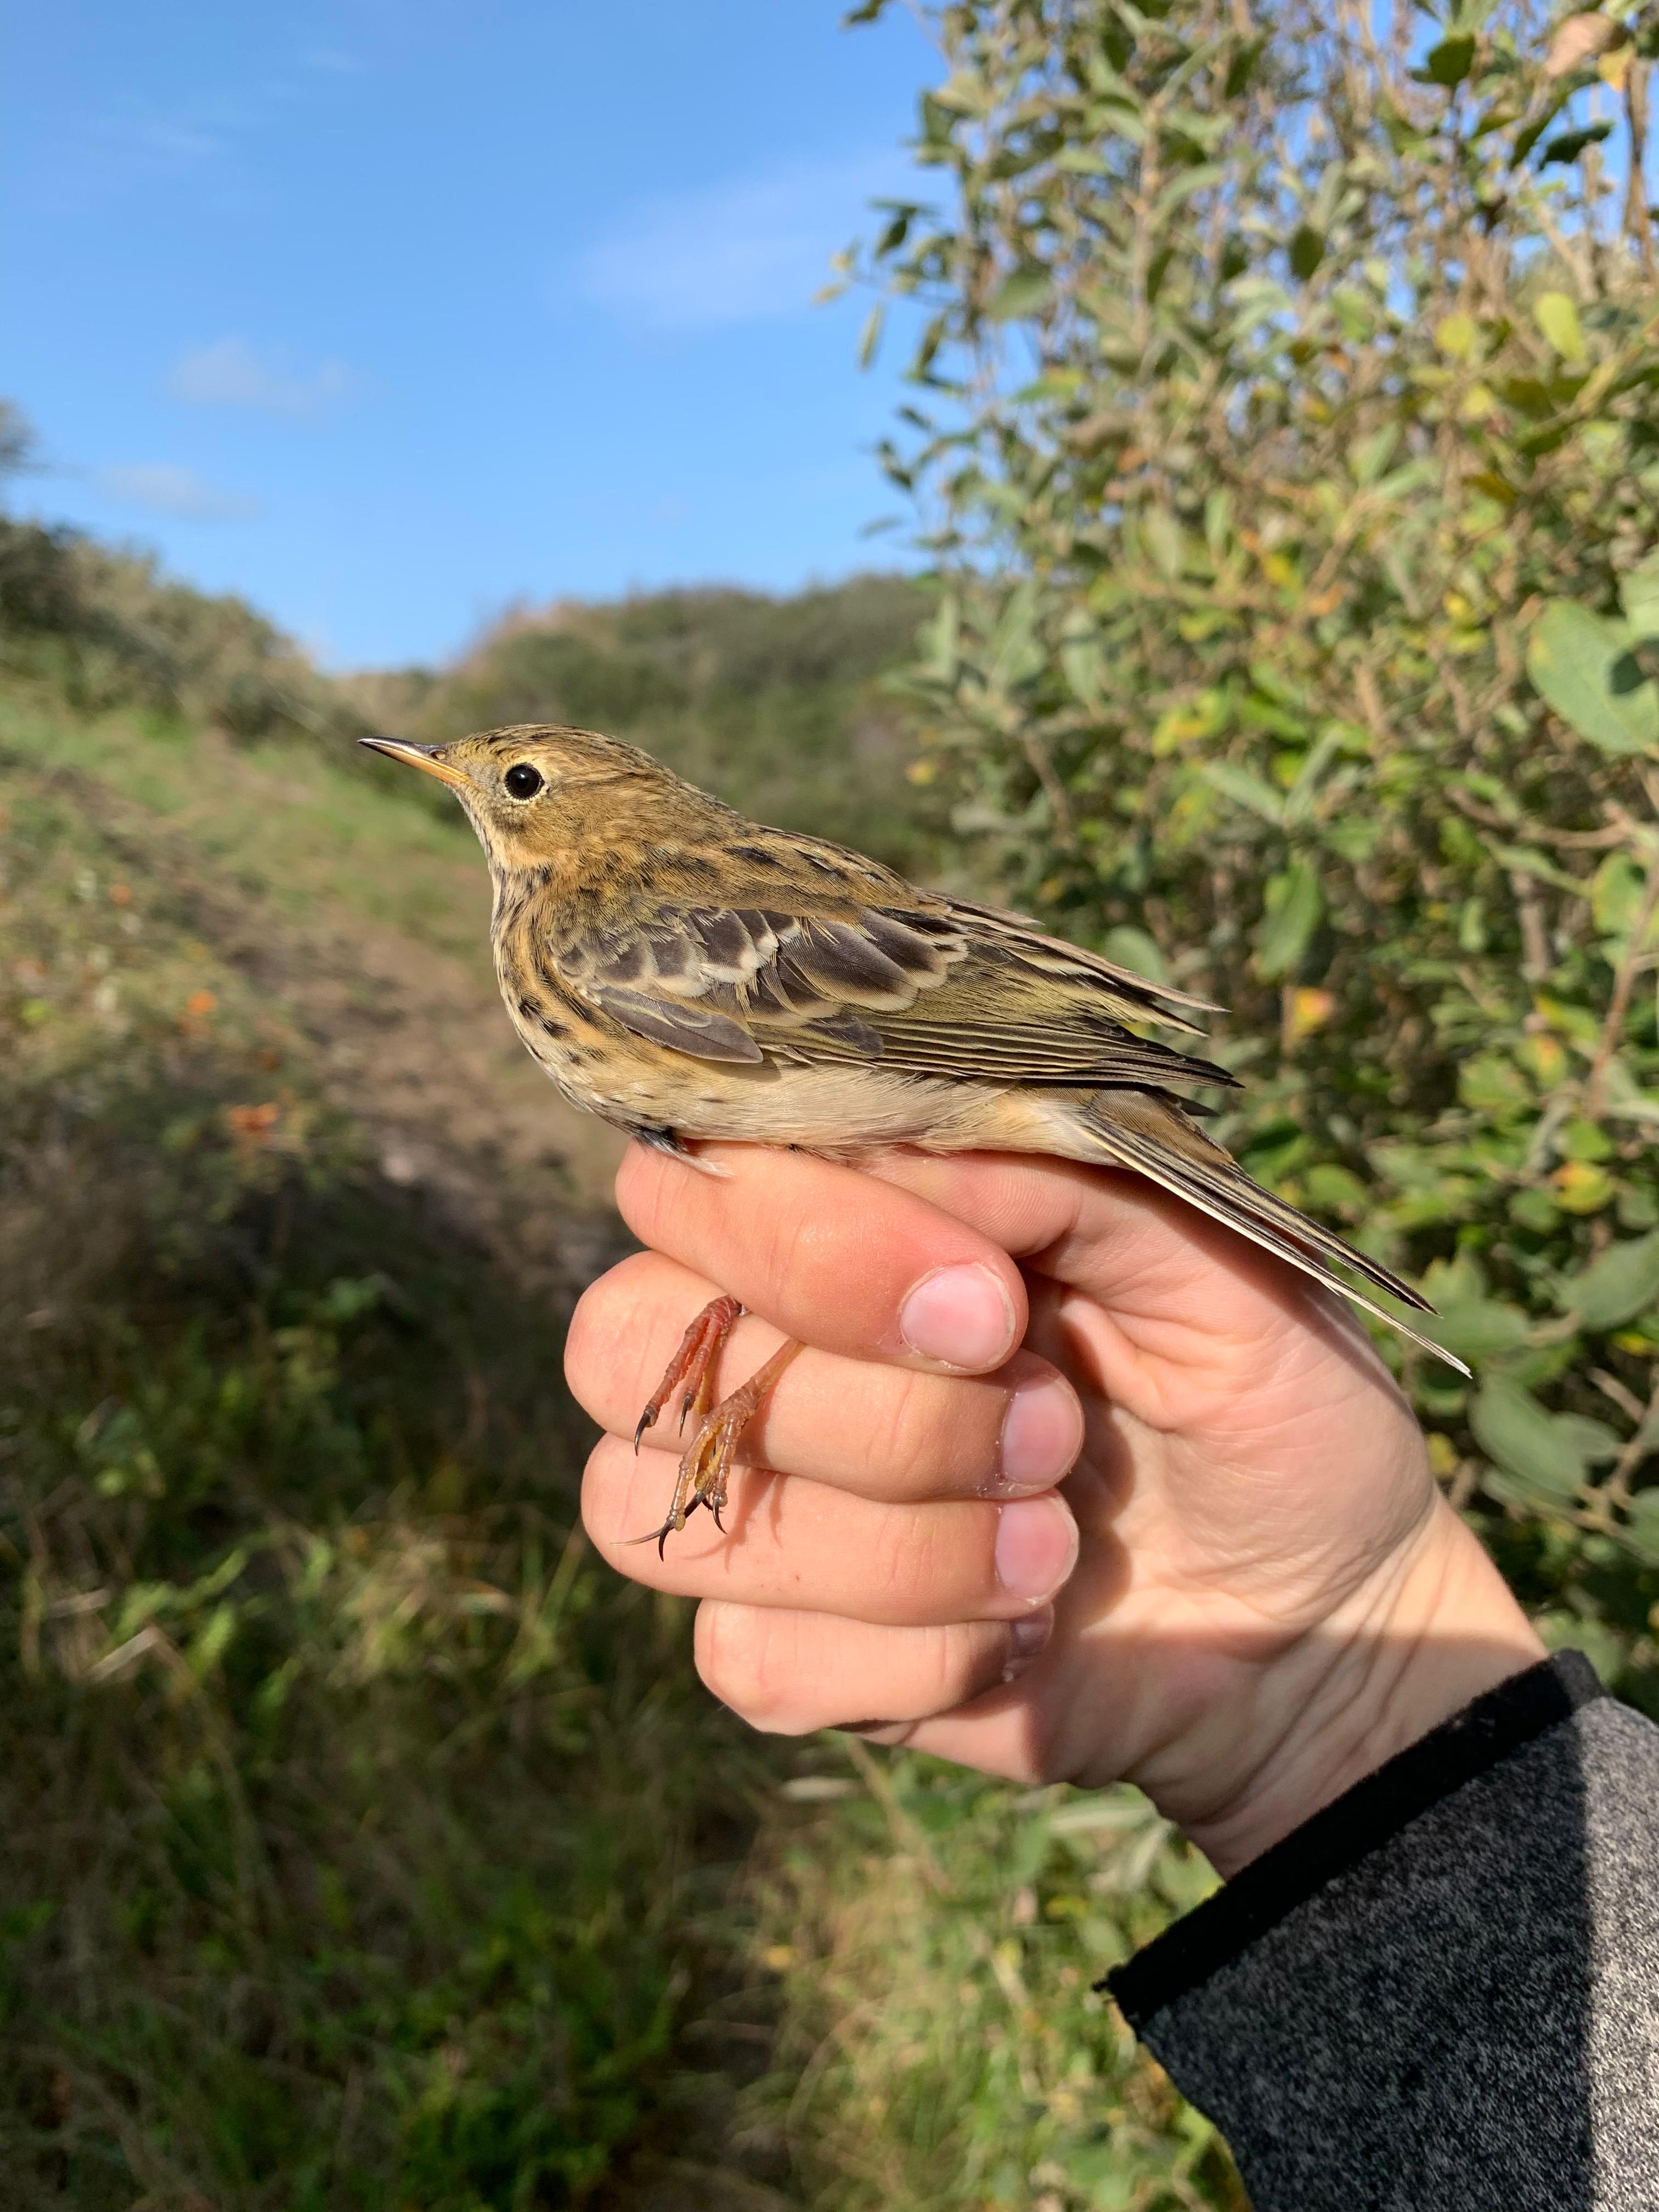 01.10.23 Meadow pipit